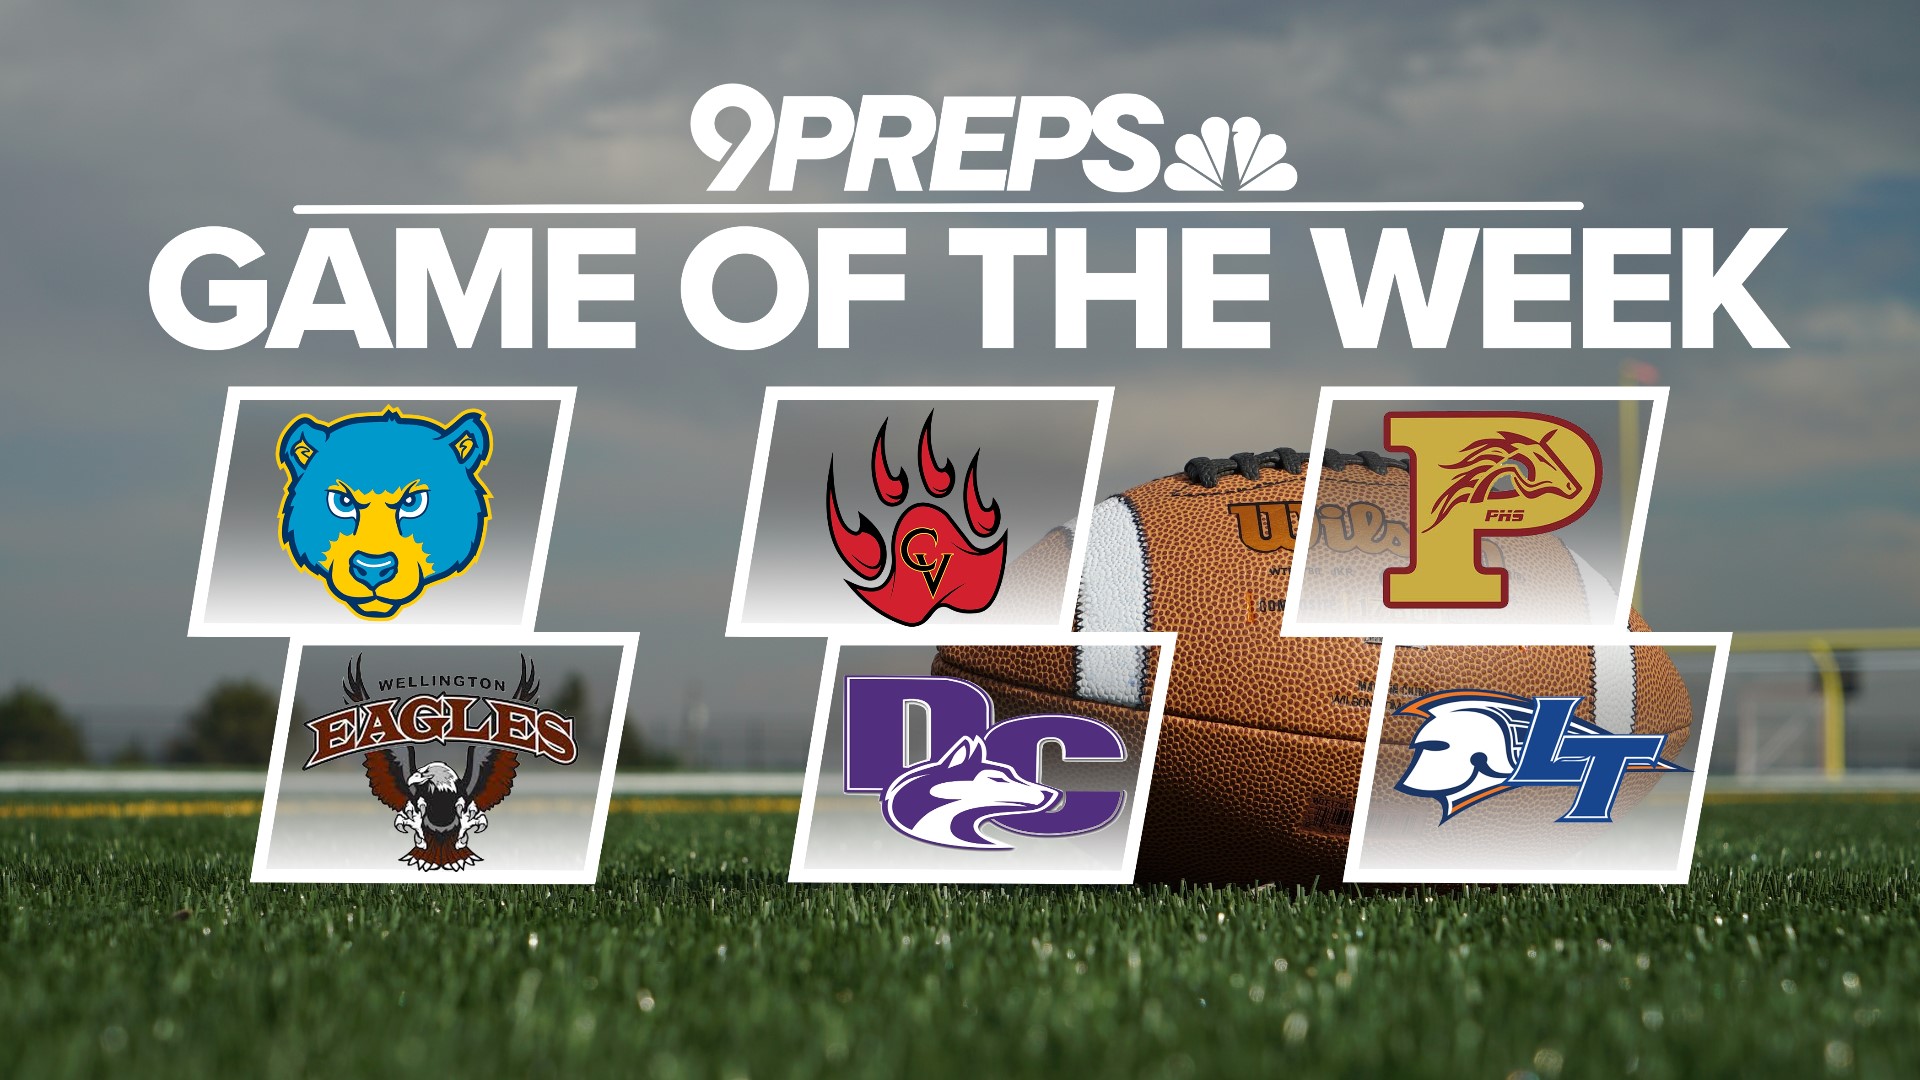 The 9Preps Game of the Week rolls on! Vote to determine which high school football game we showcase on Friday, Sept. 15.